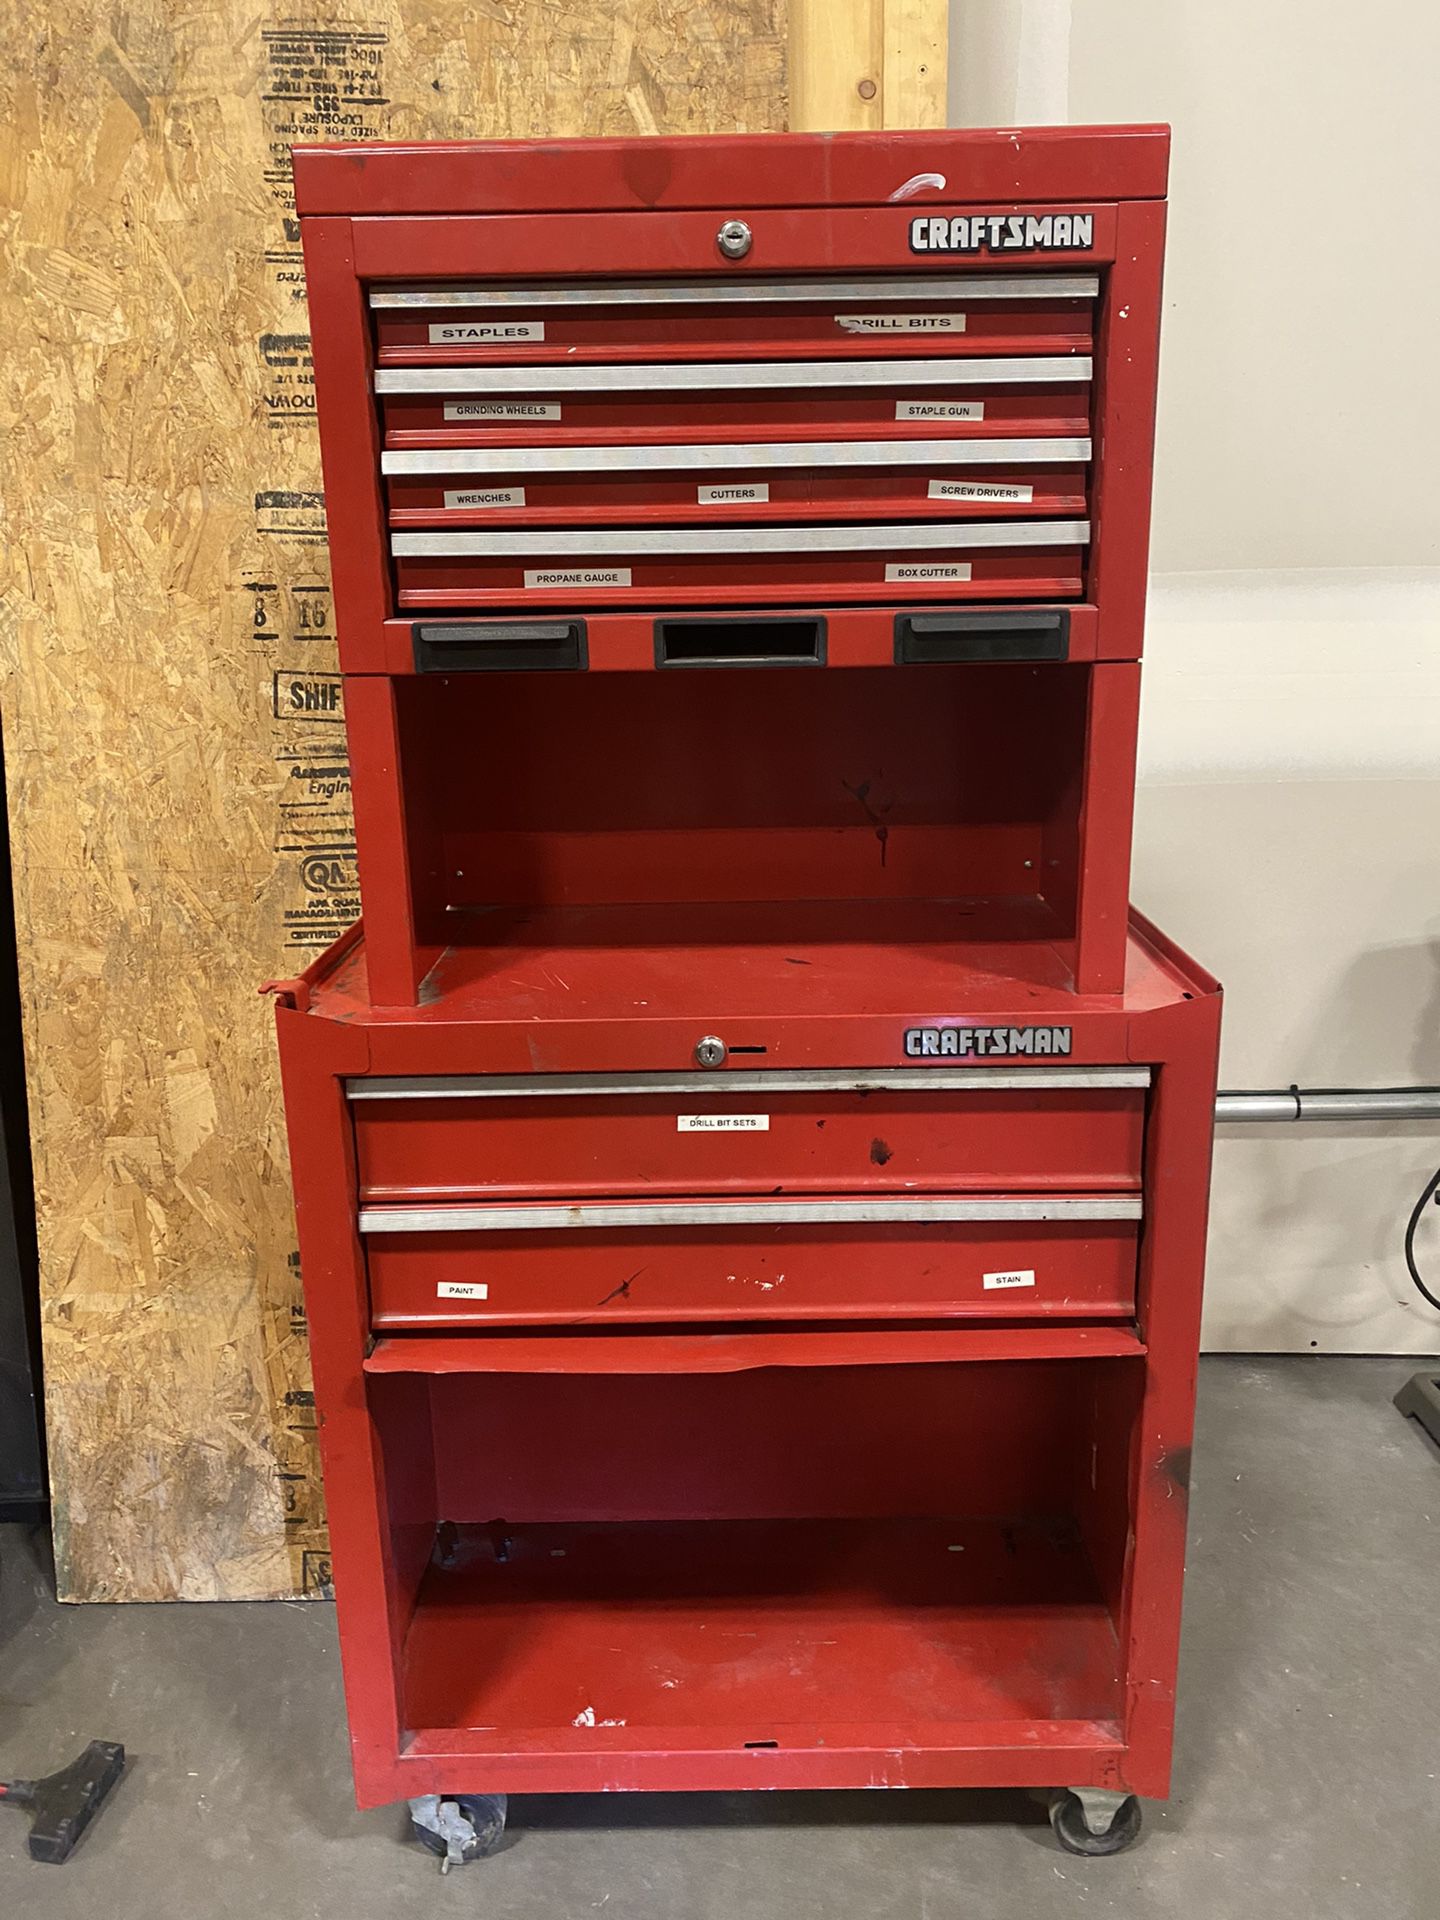 Craftsman tool chest on casters for sale.